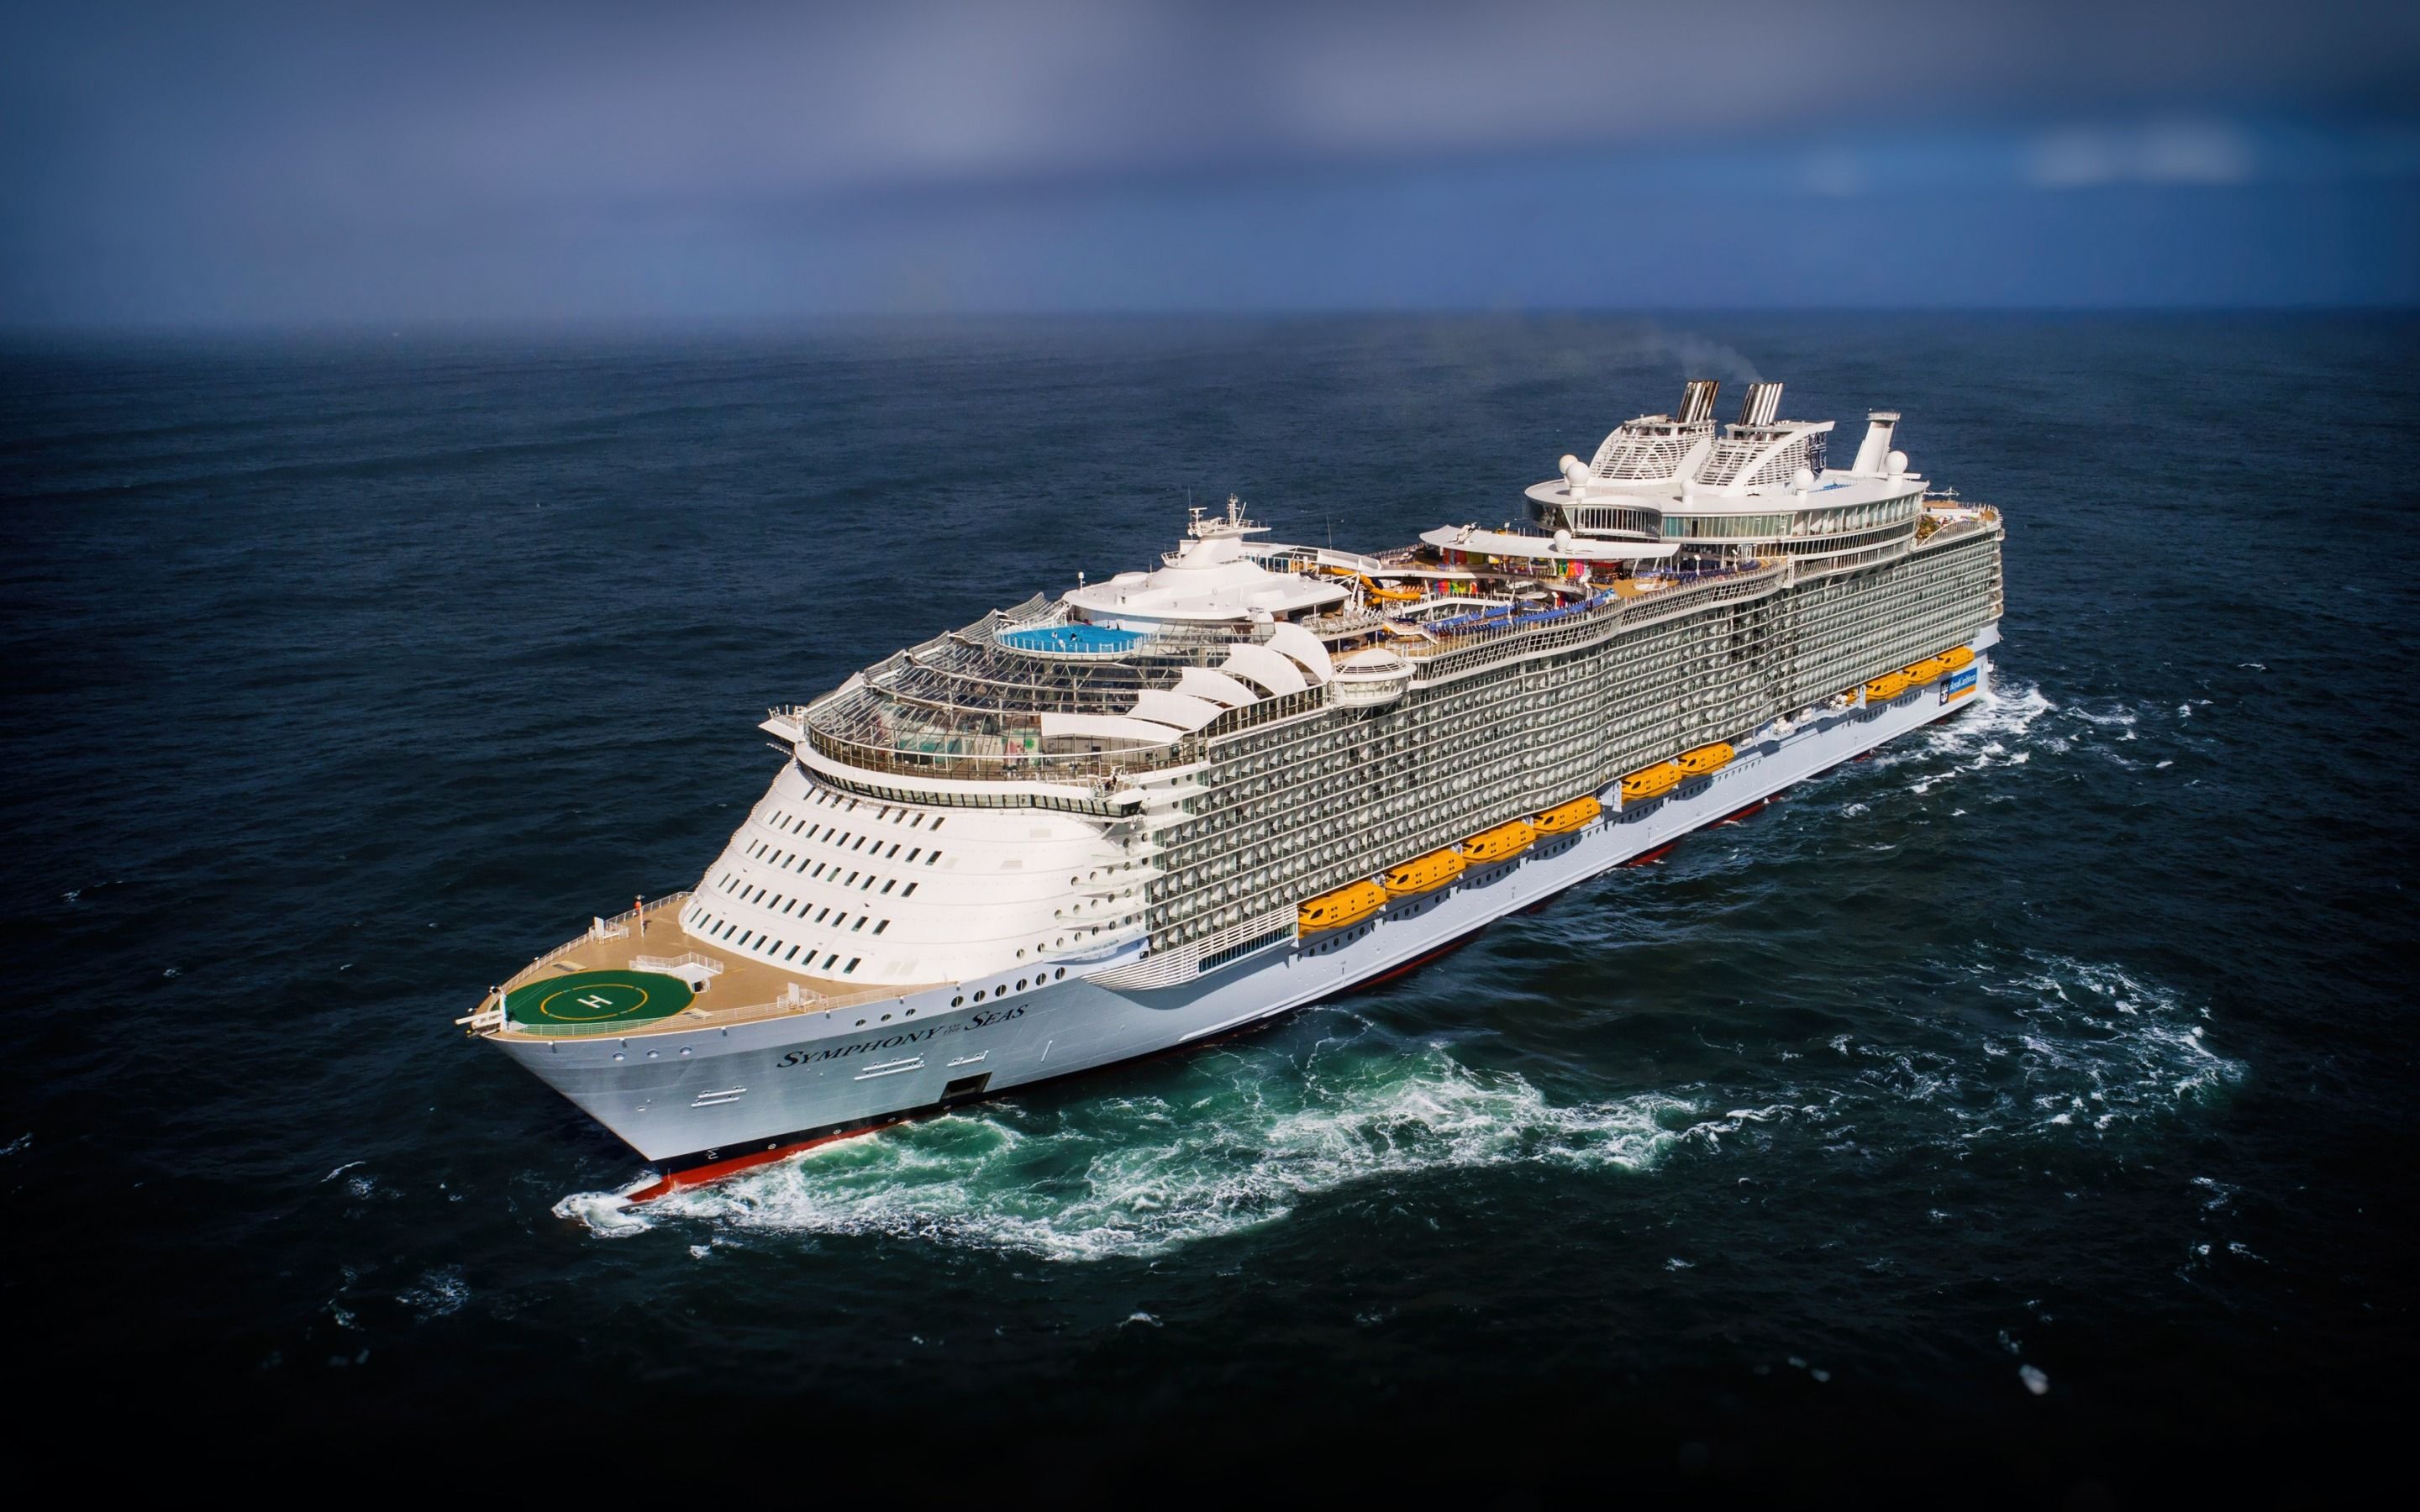 Download wallpaper Symphony of the Seas, cruise ship, luxury large white ship, sea, cruise liner, Royal Caribbean International, Oasis for desktop with resolution 2880x1800. High Quality HD picture wallpaper